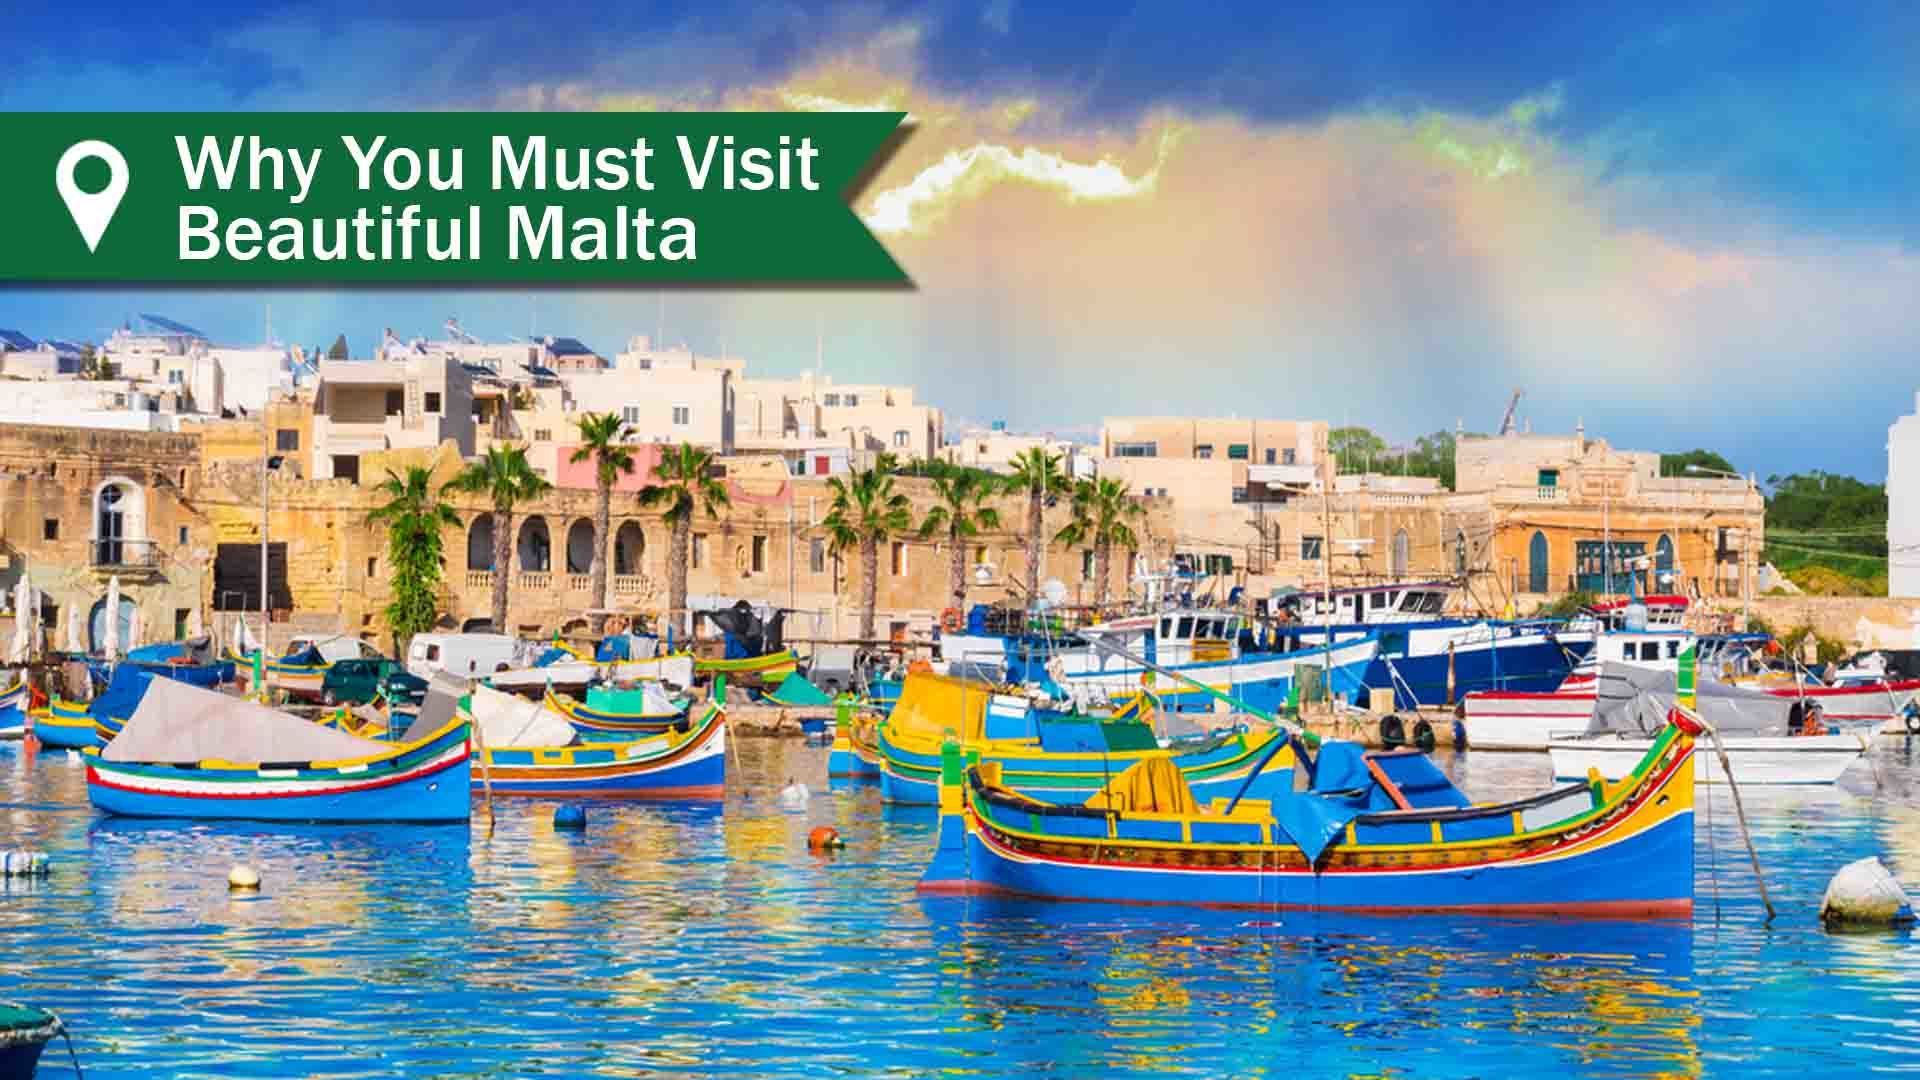 Views of Beautiful Malta - and why you must visit